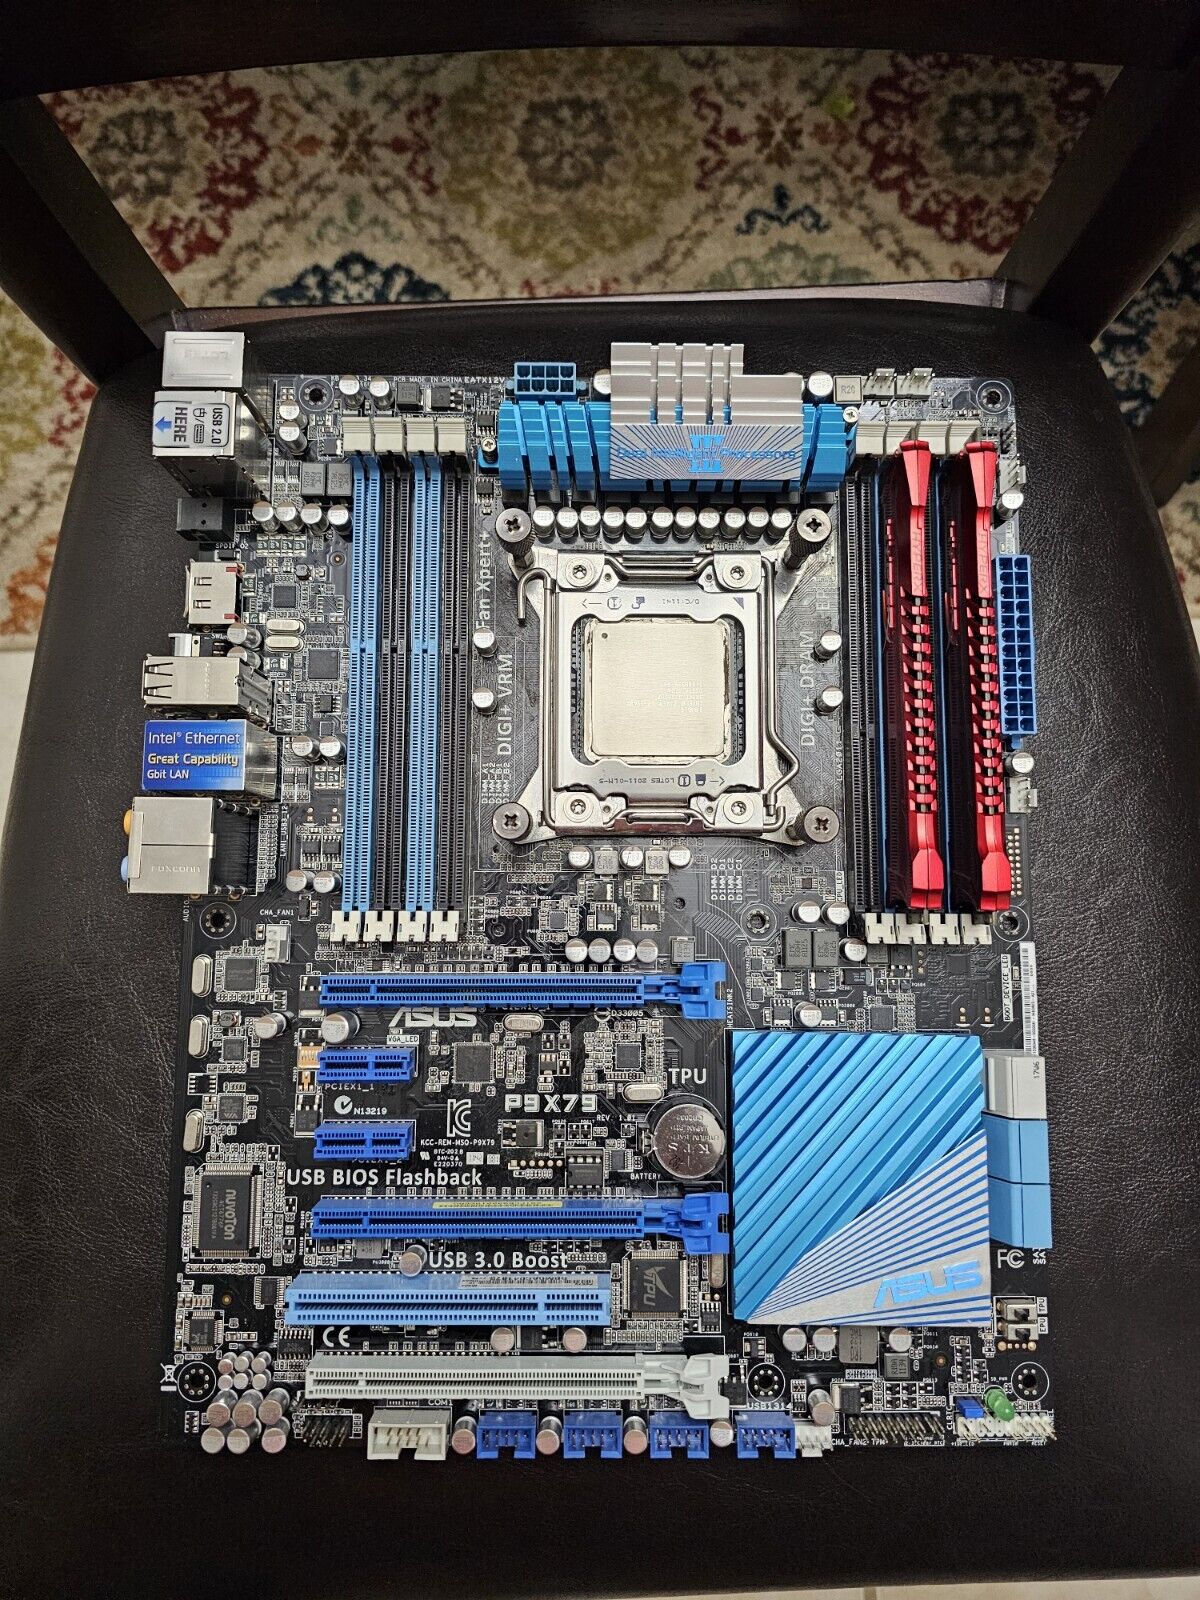 ASUS P9X79 Motherboard LGA 2011 Intel Motherboard with i7 3960x and 16gb ddr3